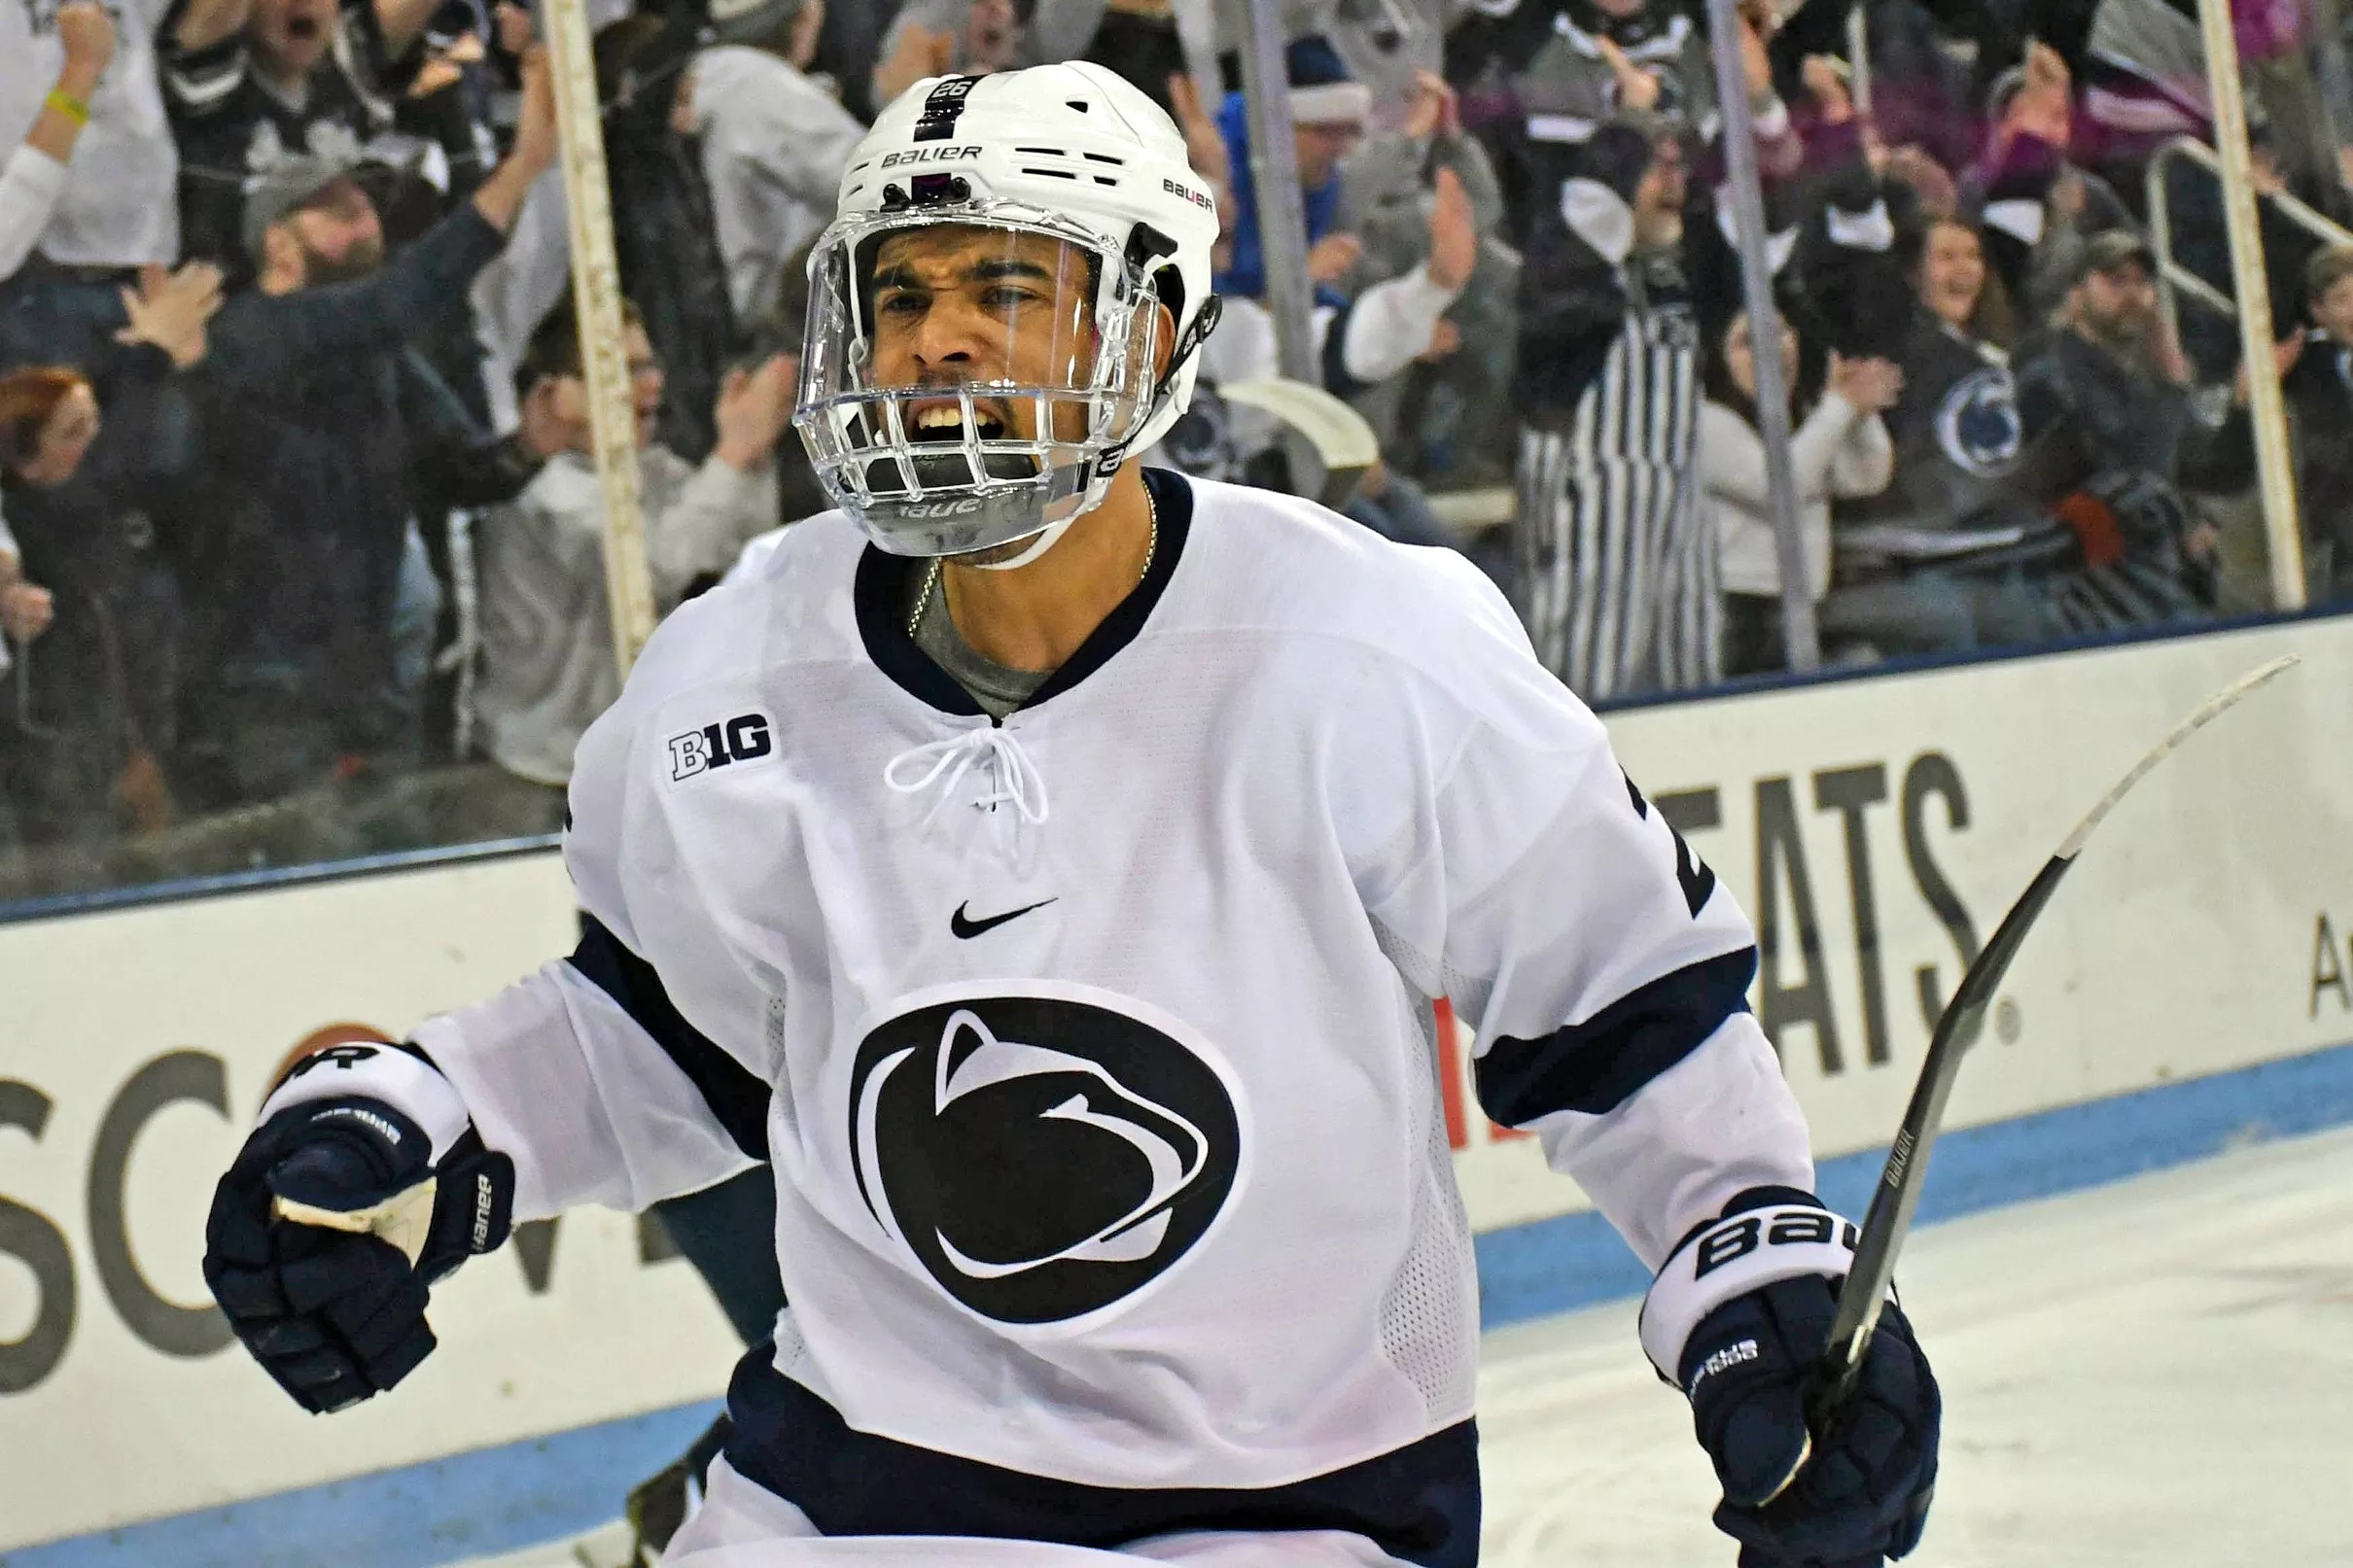 A Look At The Players For Penn State Hockey